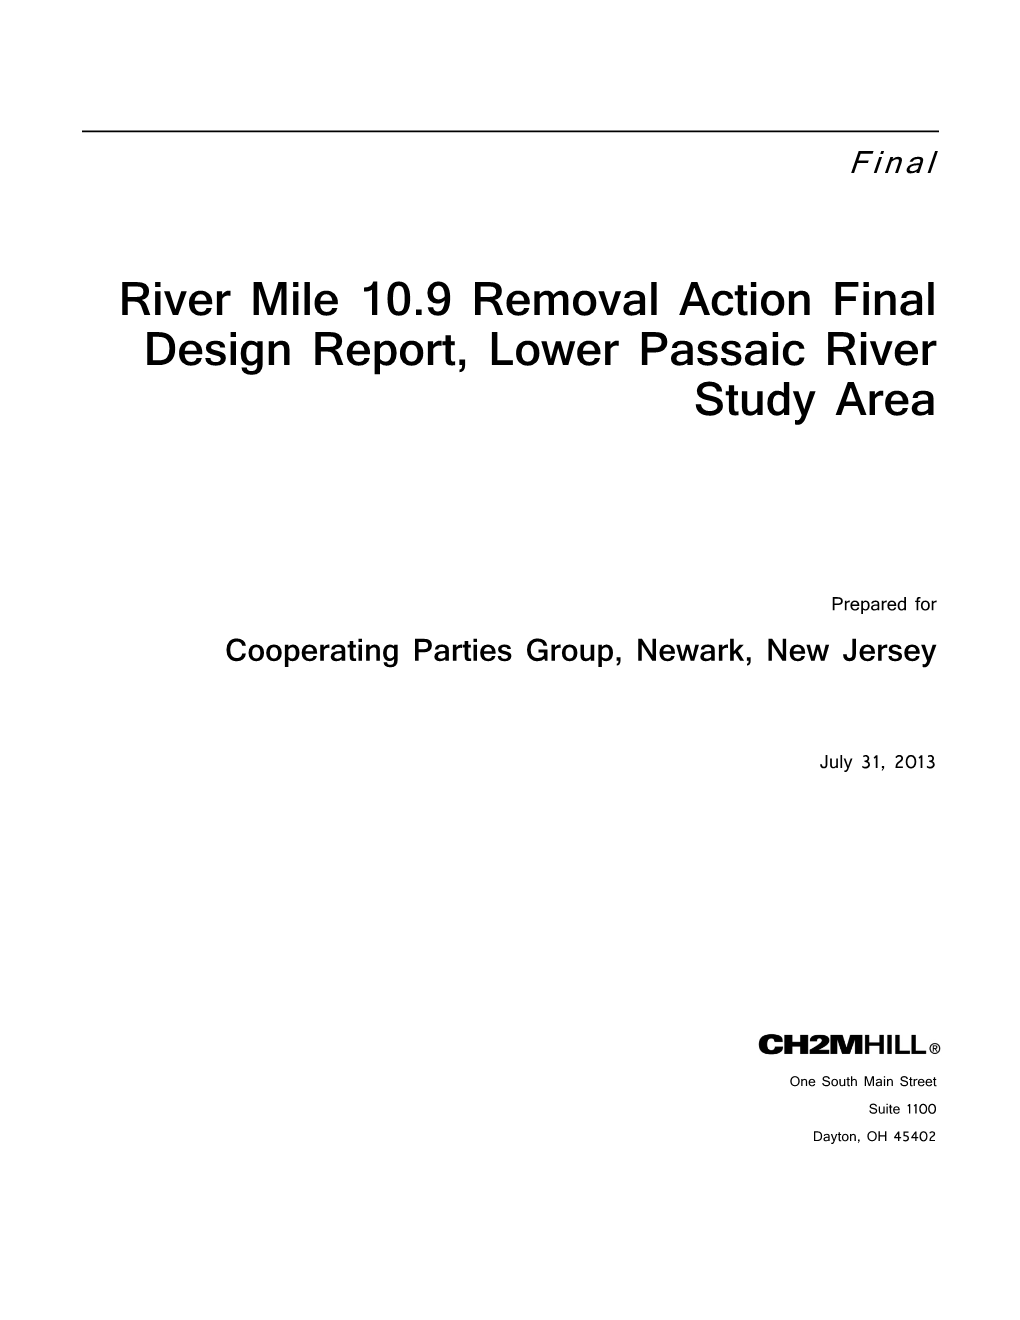 River Mile 10.9 Removal Action Final Design Report, Lower Passaic River Study Area